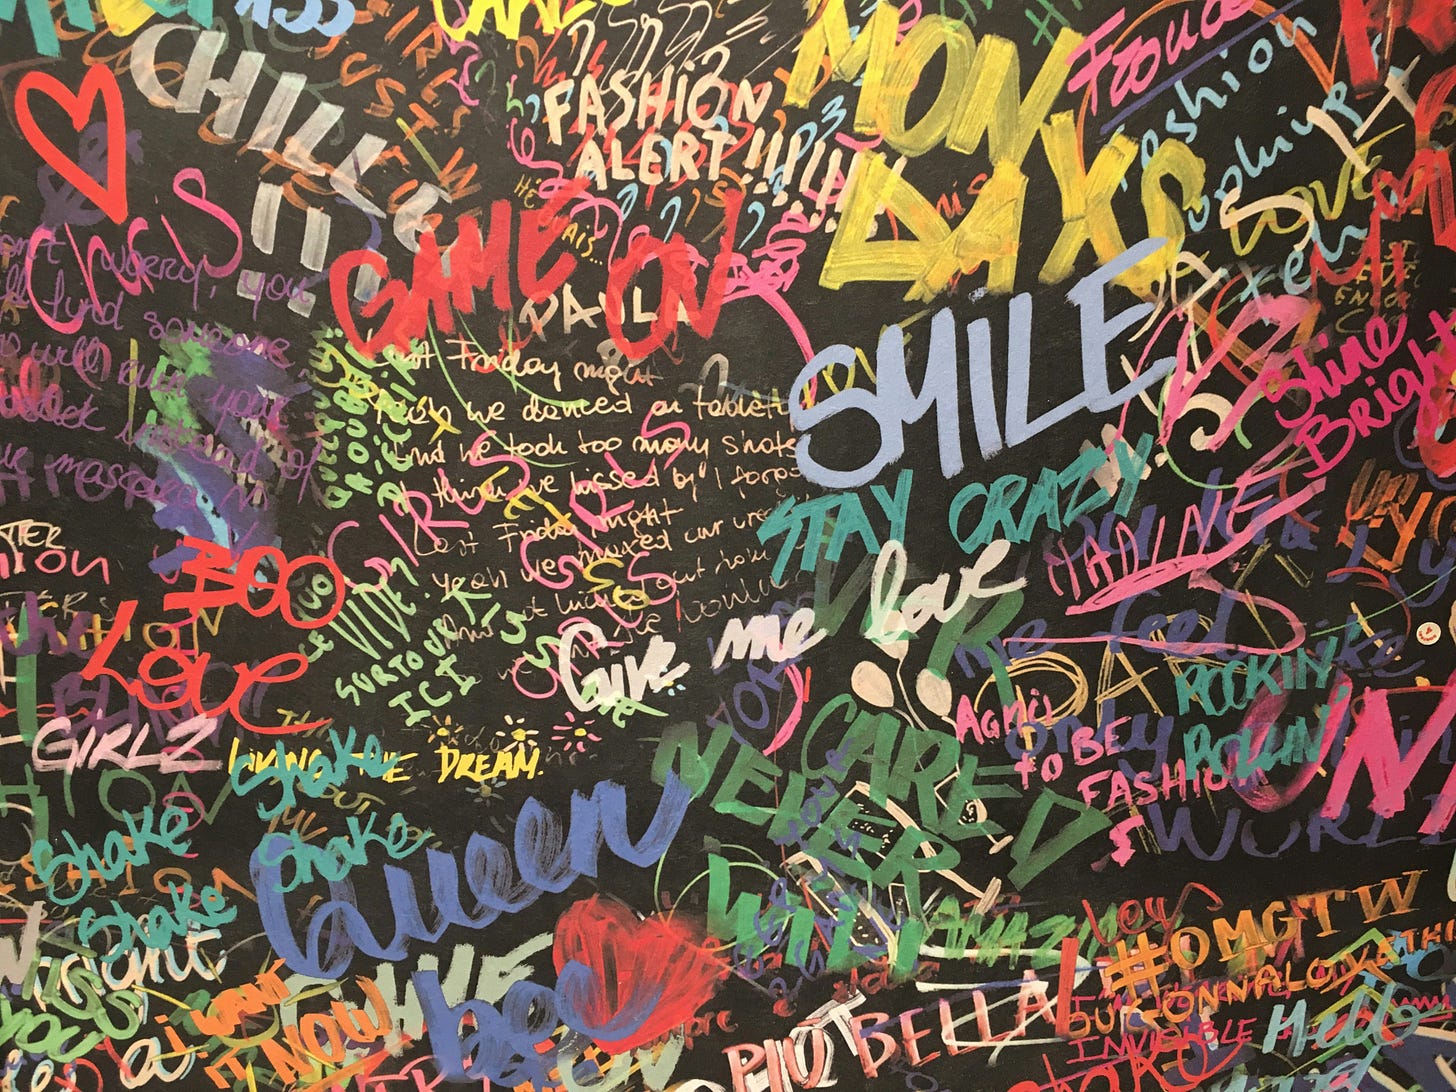 colorful words on a graffiti wall